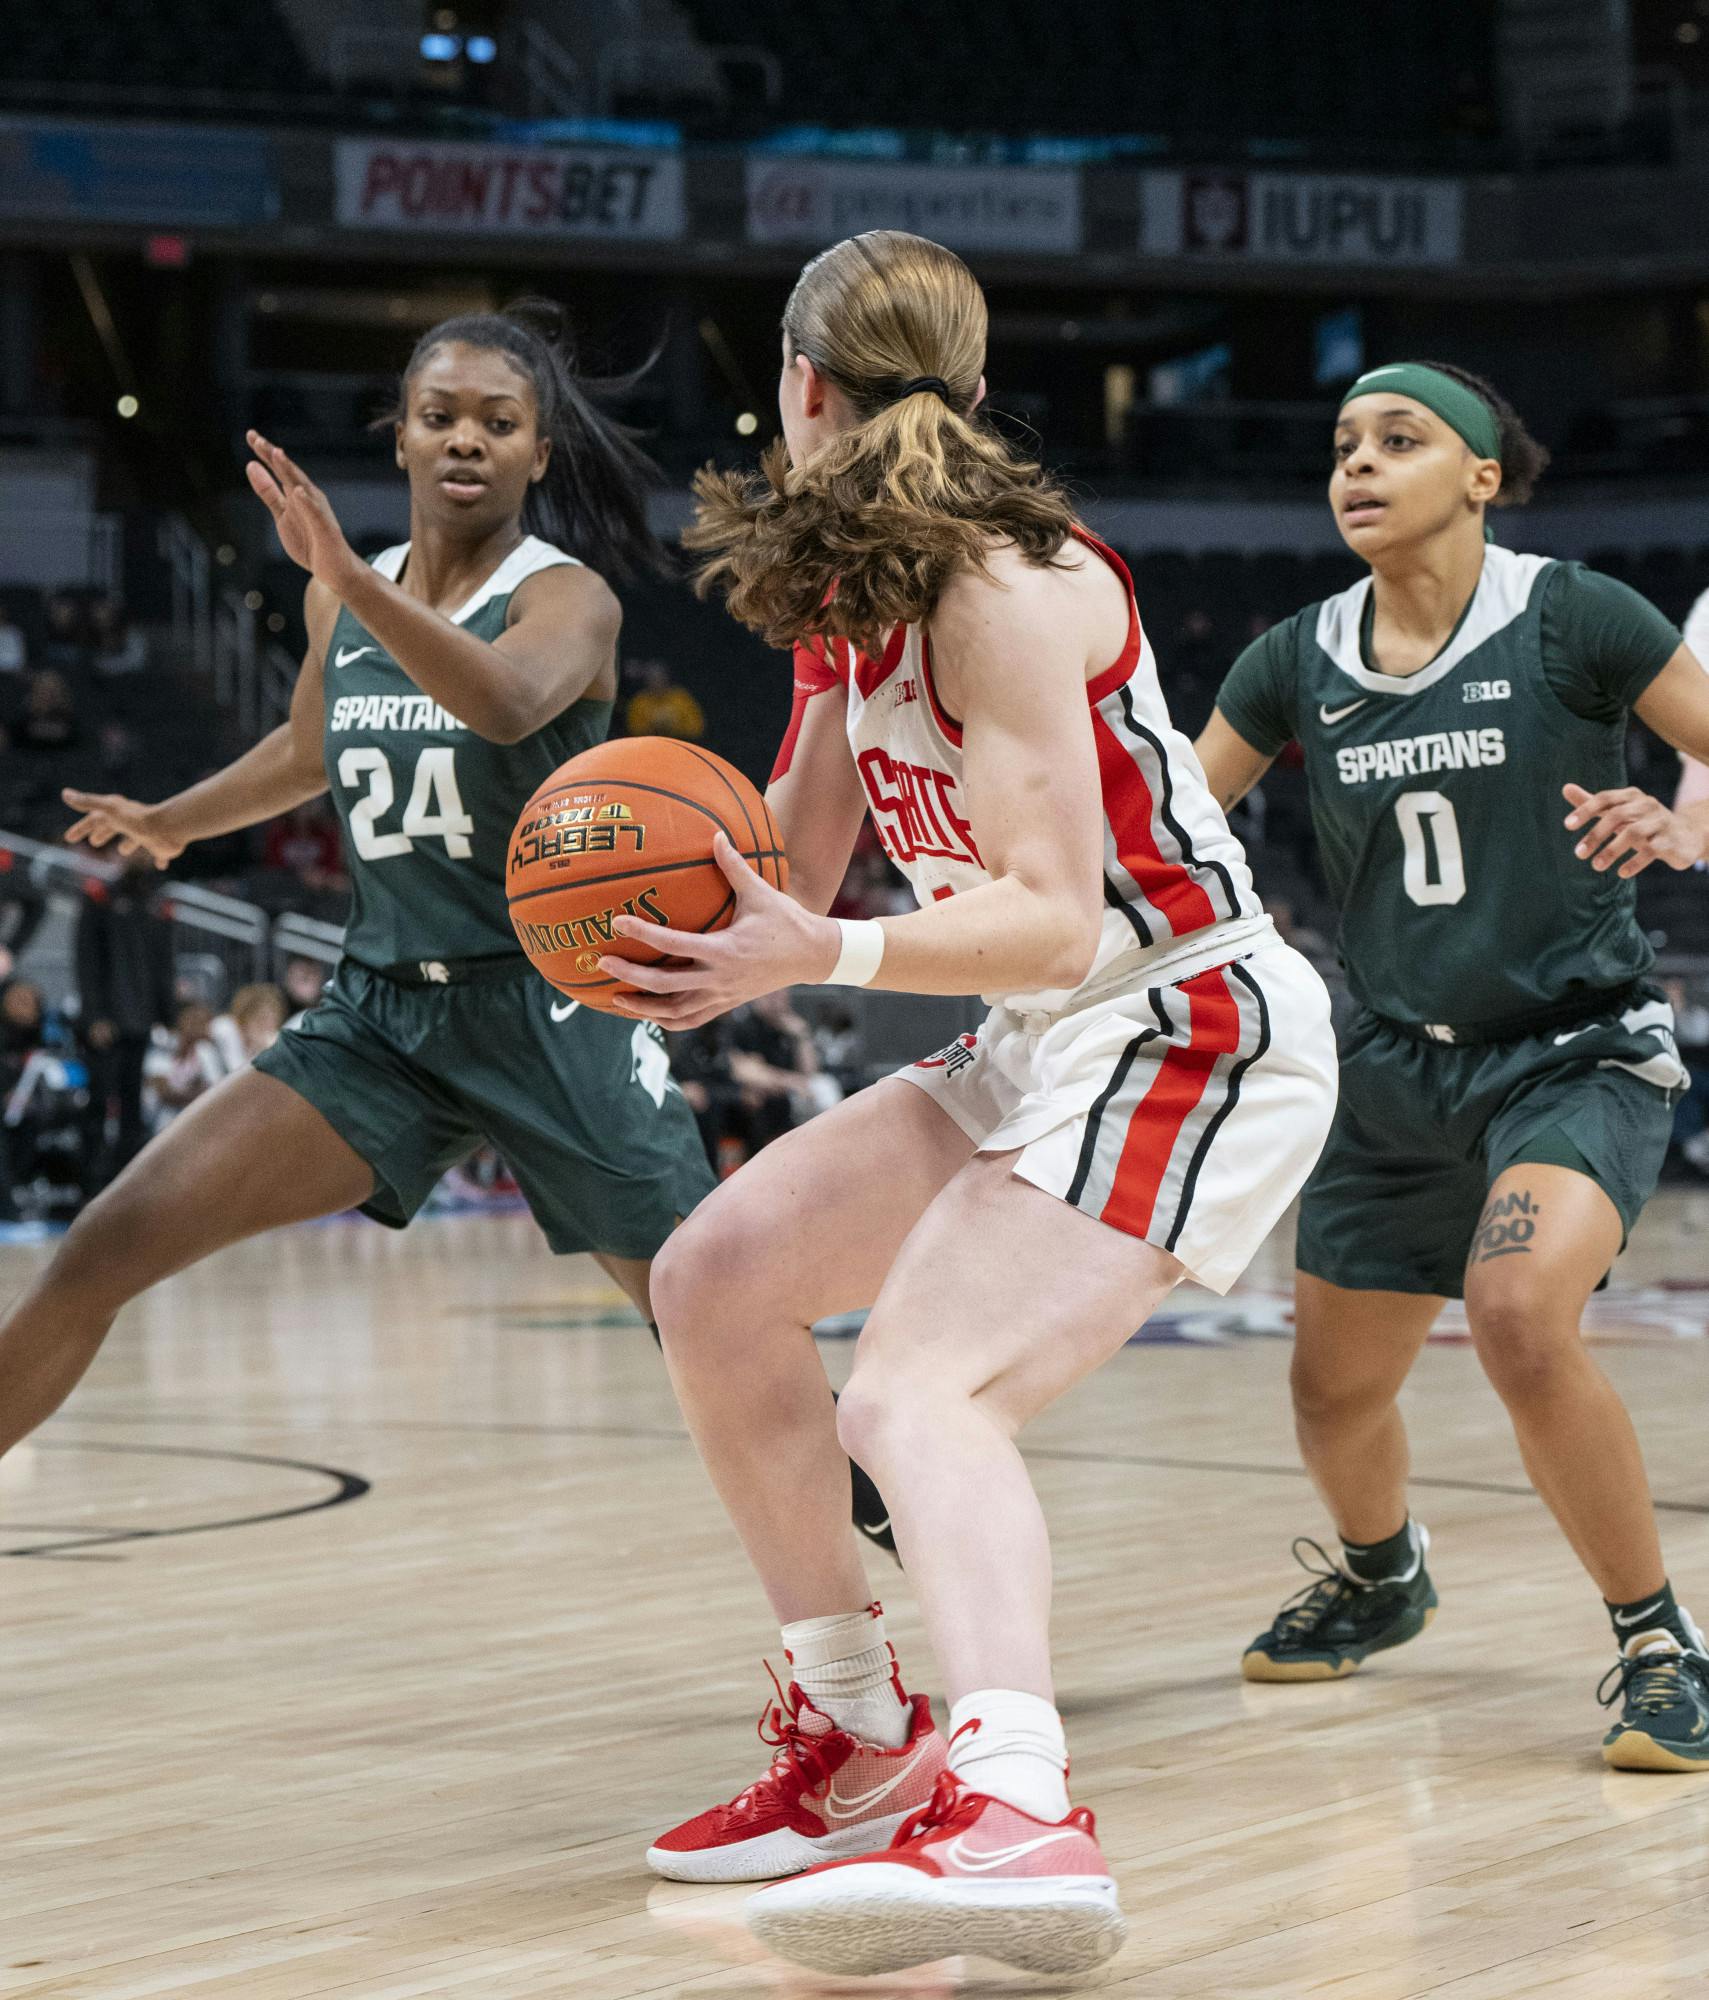 Clouden (24) and Hagemann (0) team up to guard Ohio State's Taylor Mikesell (24) in the Spartans’ contest against the Buckeyes at Gainbridge Fieldhouse in Indianapolis. - March 4, 2022.